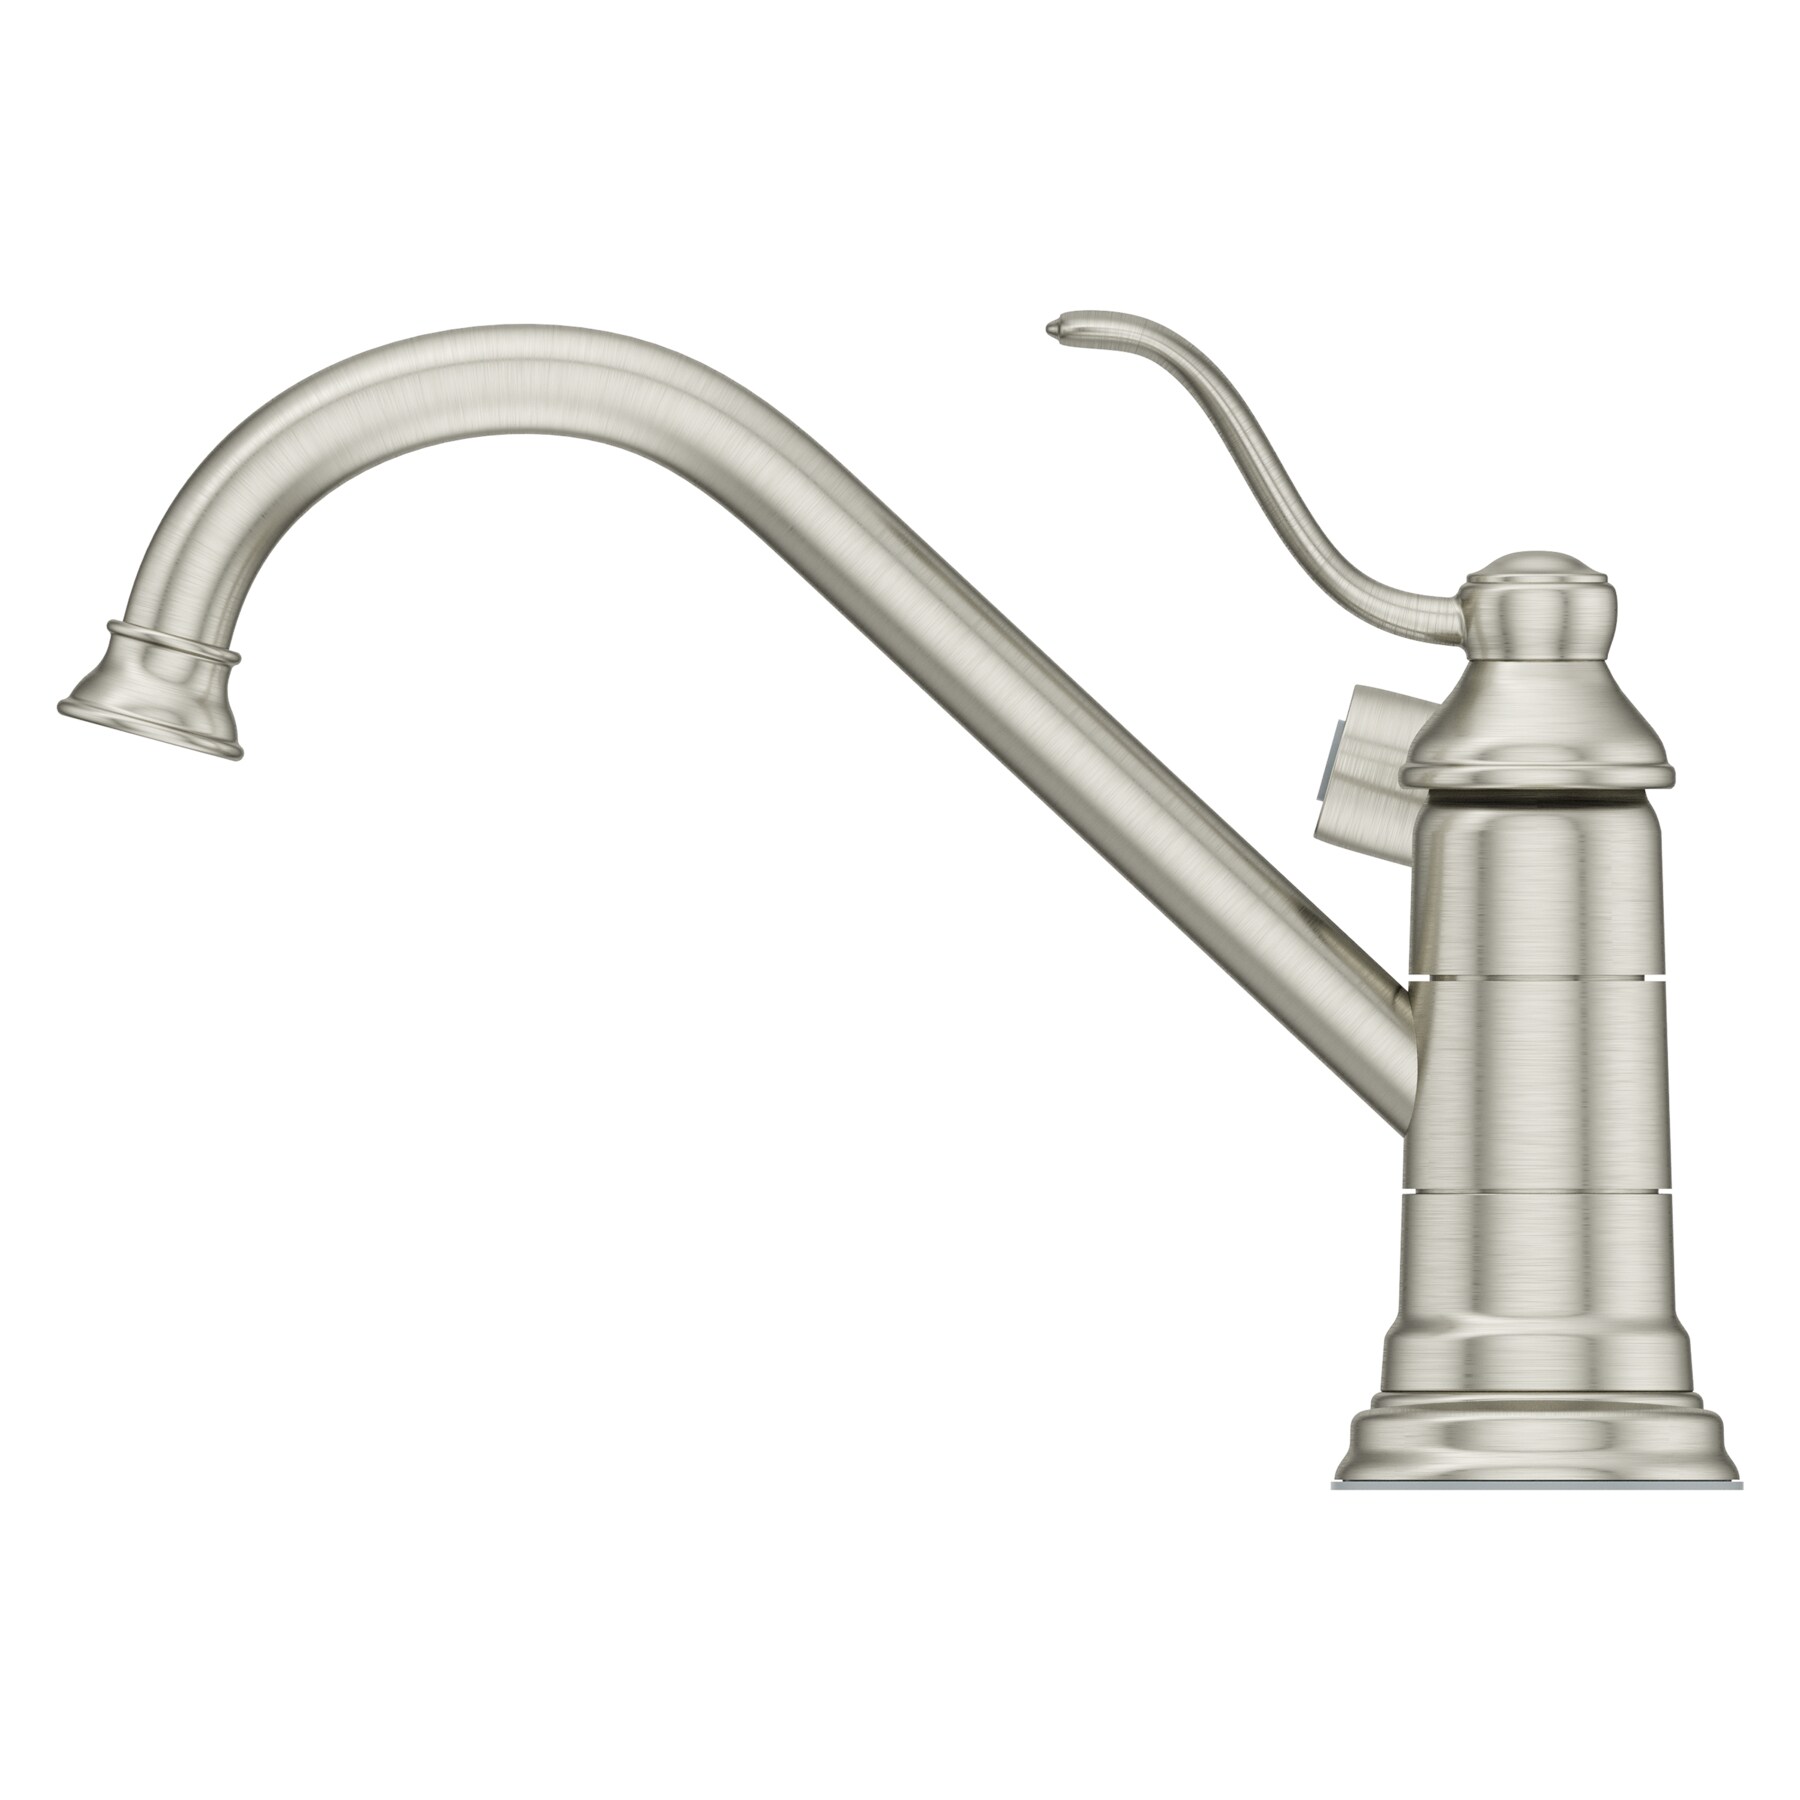 Pfister Portland Stainless Steel Single Handle High-arc Kitchen Faucet (Deck Plate Included)